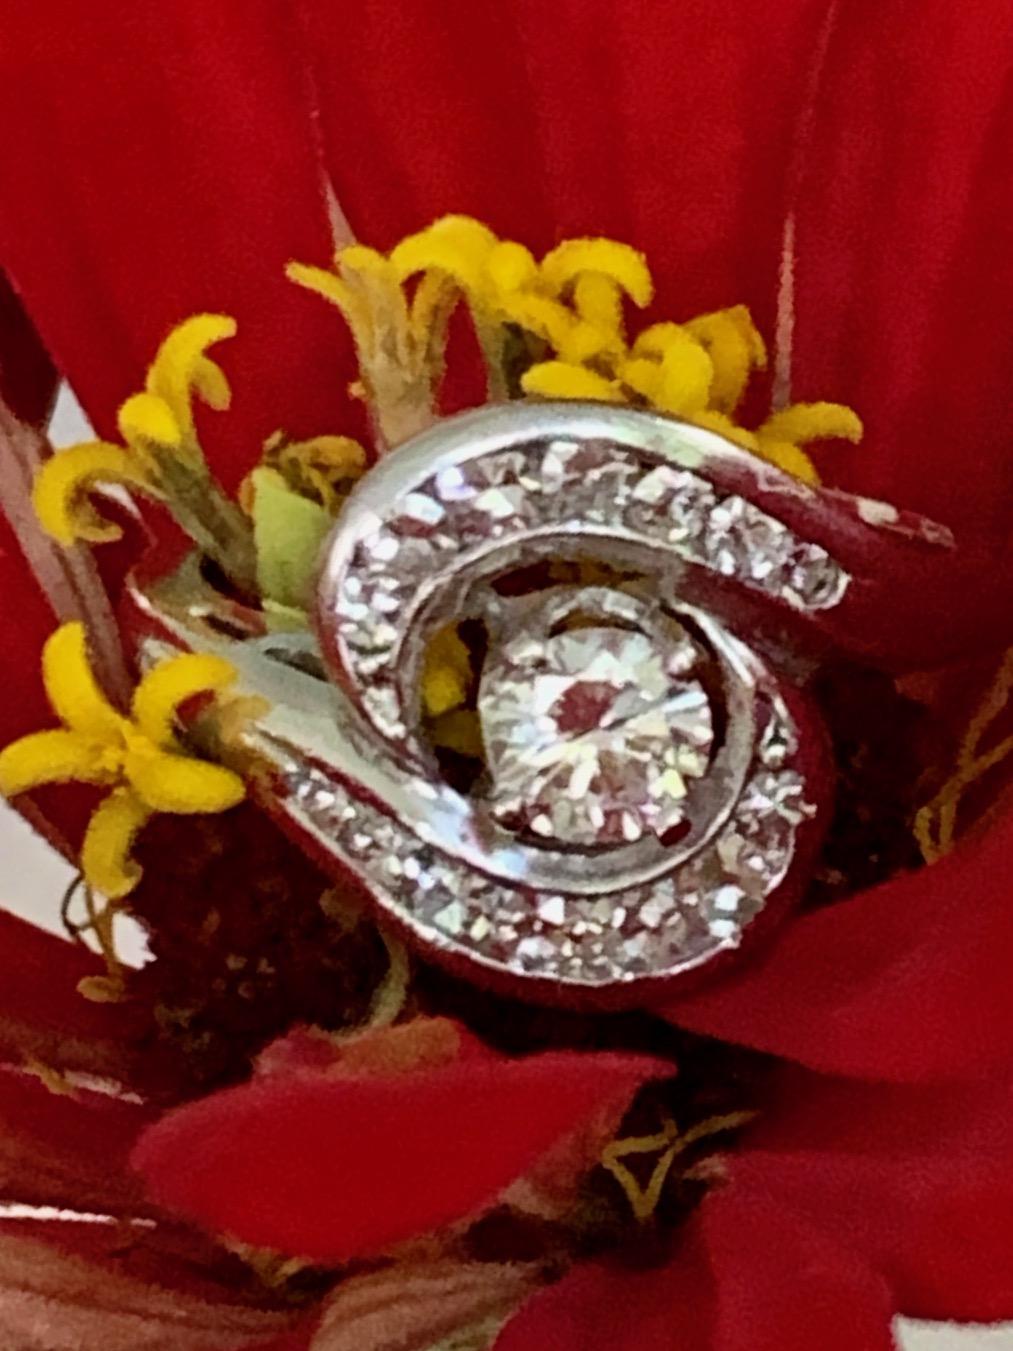 This modern 18 karat white gold Diamond ring features a center brilliant cut 4.5mm Diamond which is .35 carat.  It has an average grade of SI-G/H.

There are 14 single cut side diamonds which swirl around the center stone.  They are approximately